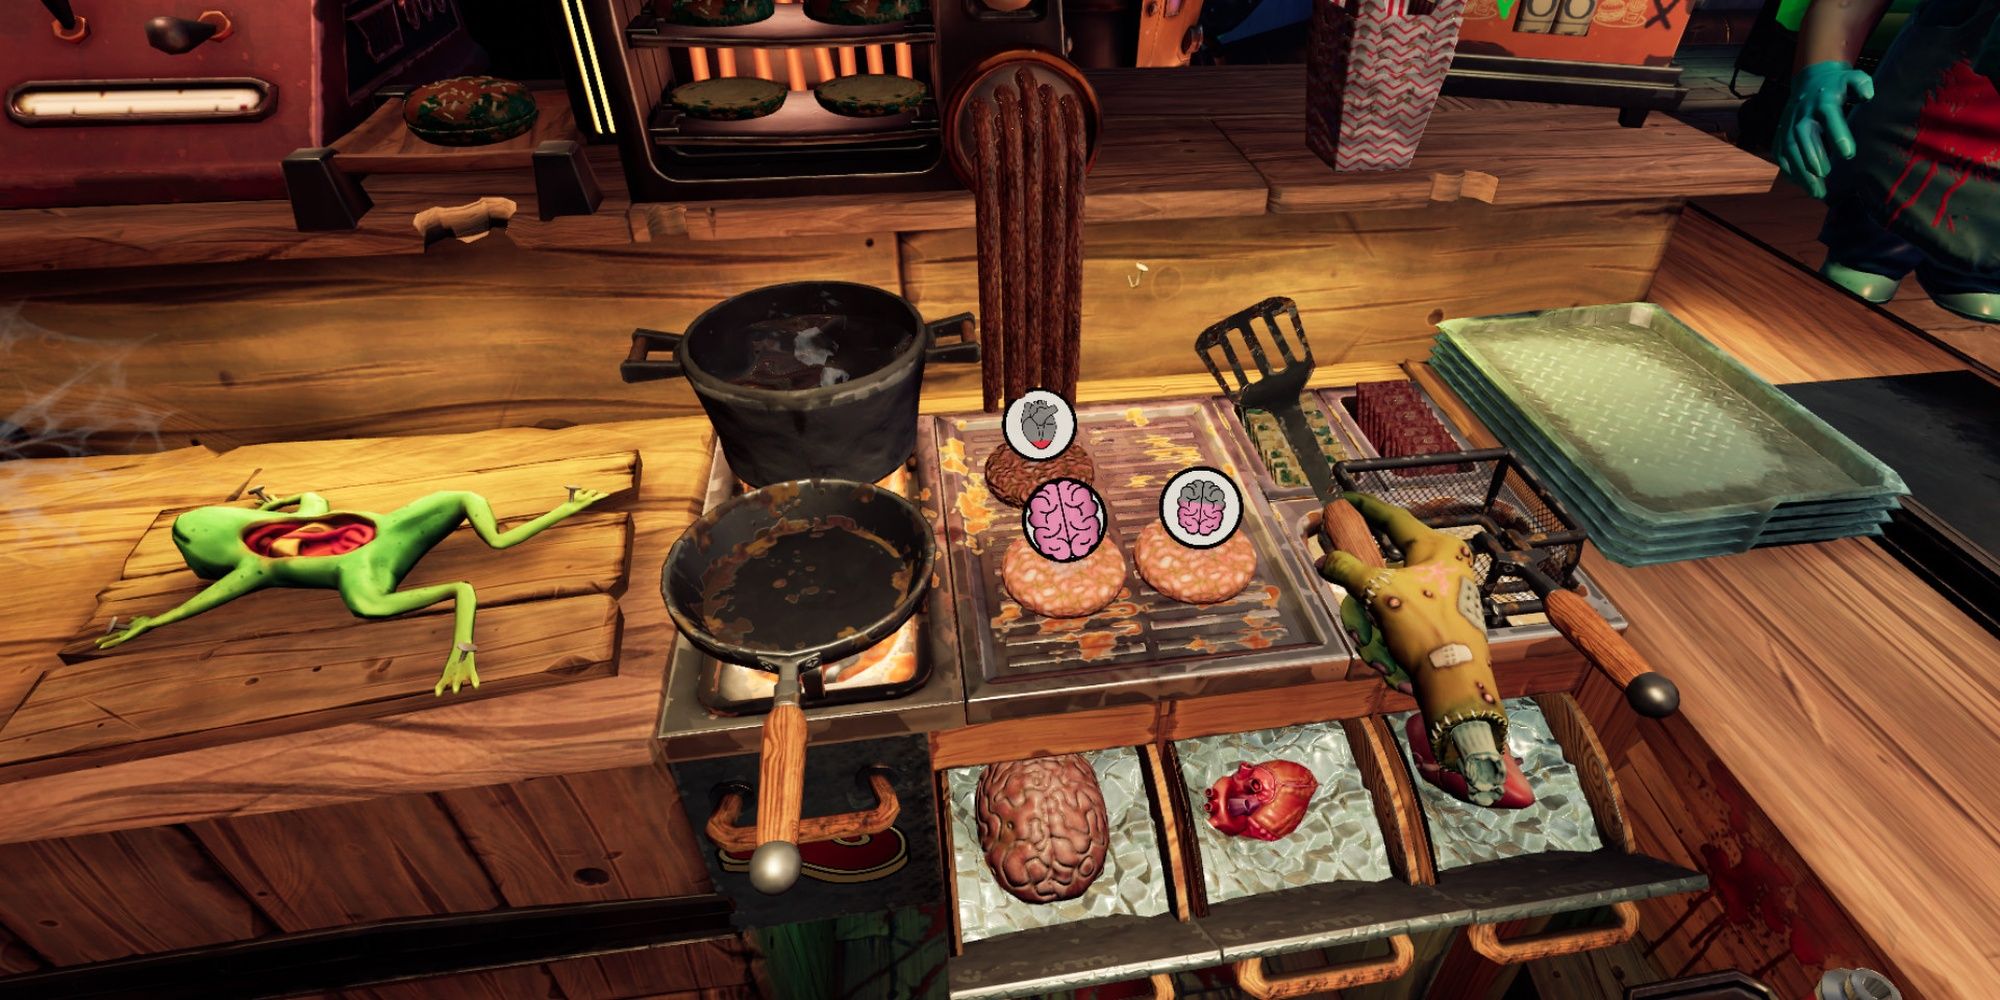 Horror Bar VR: Serving Up Body Parts On A Grill